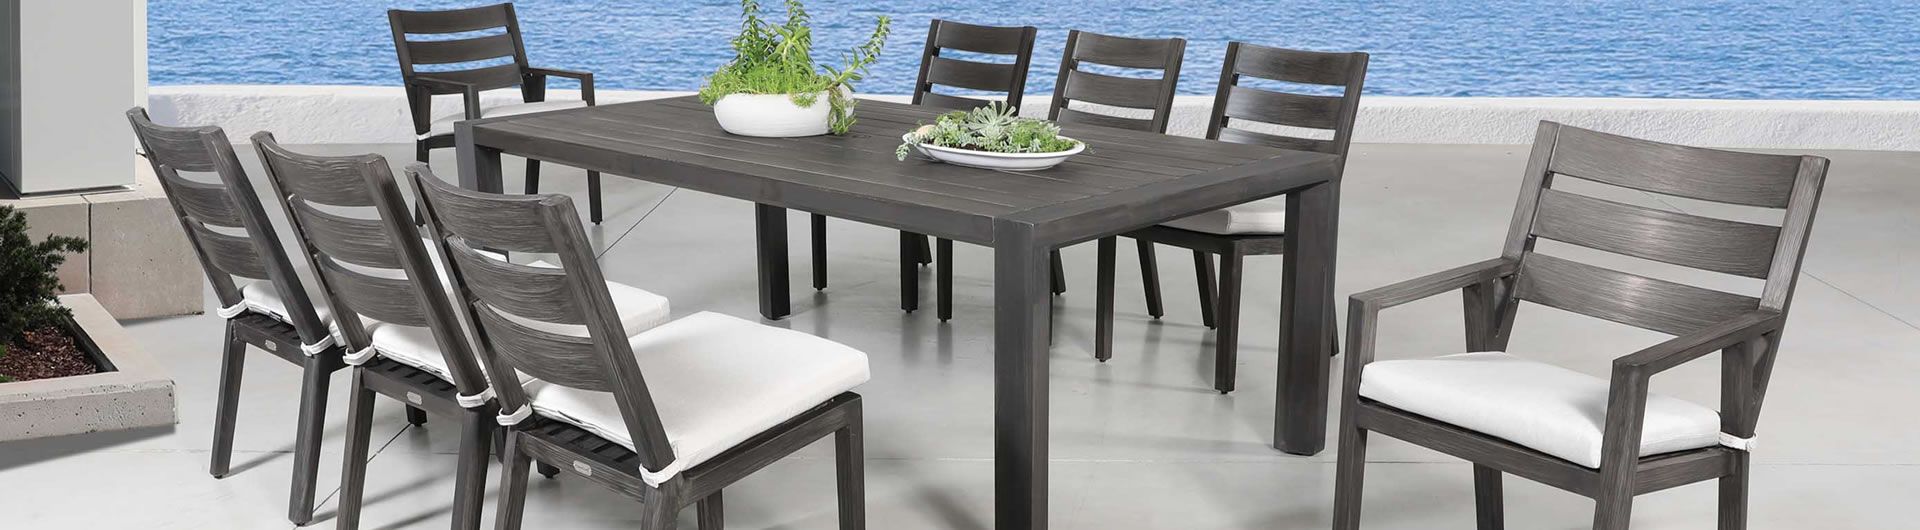 Boardwalk Dining Collection